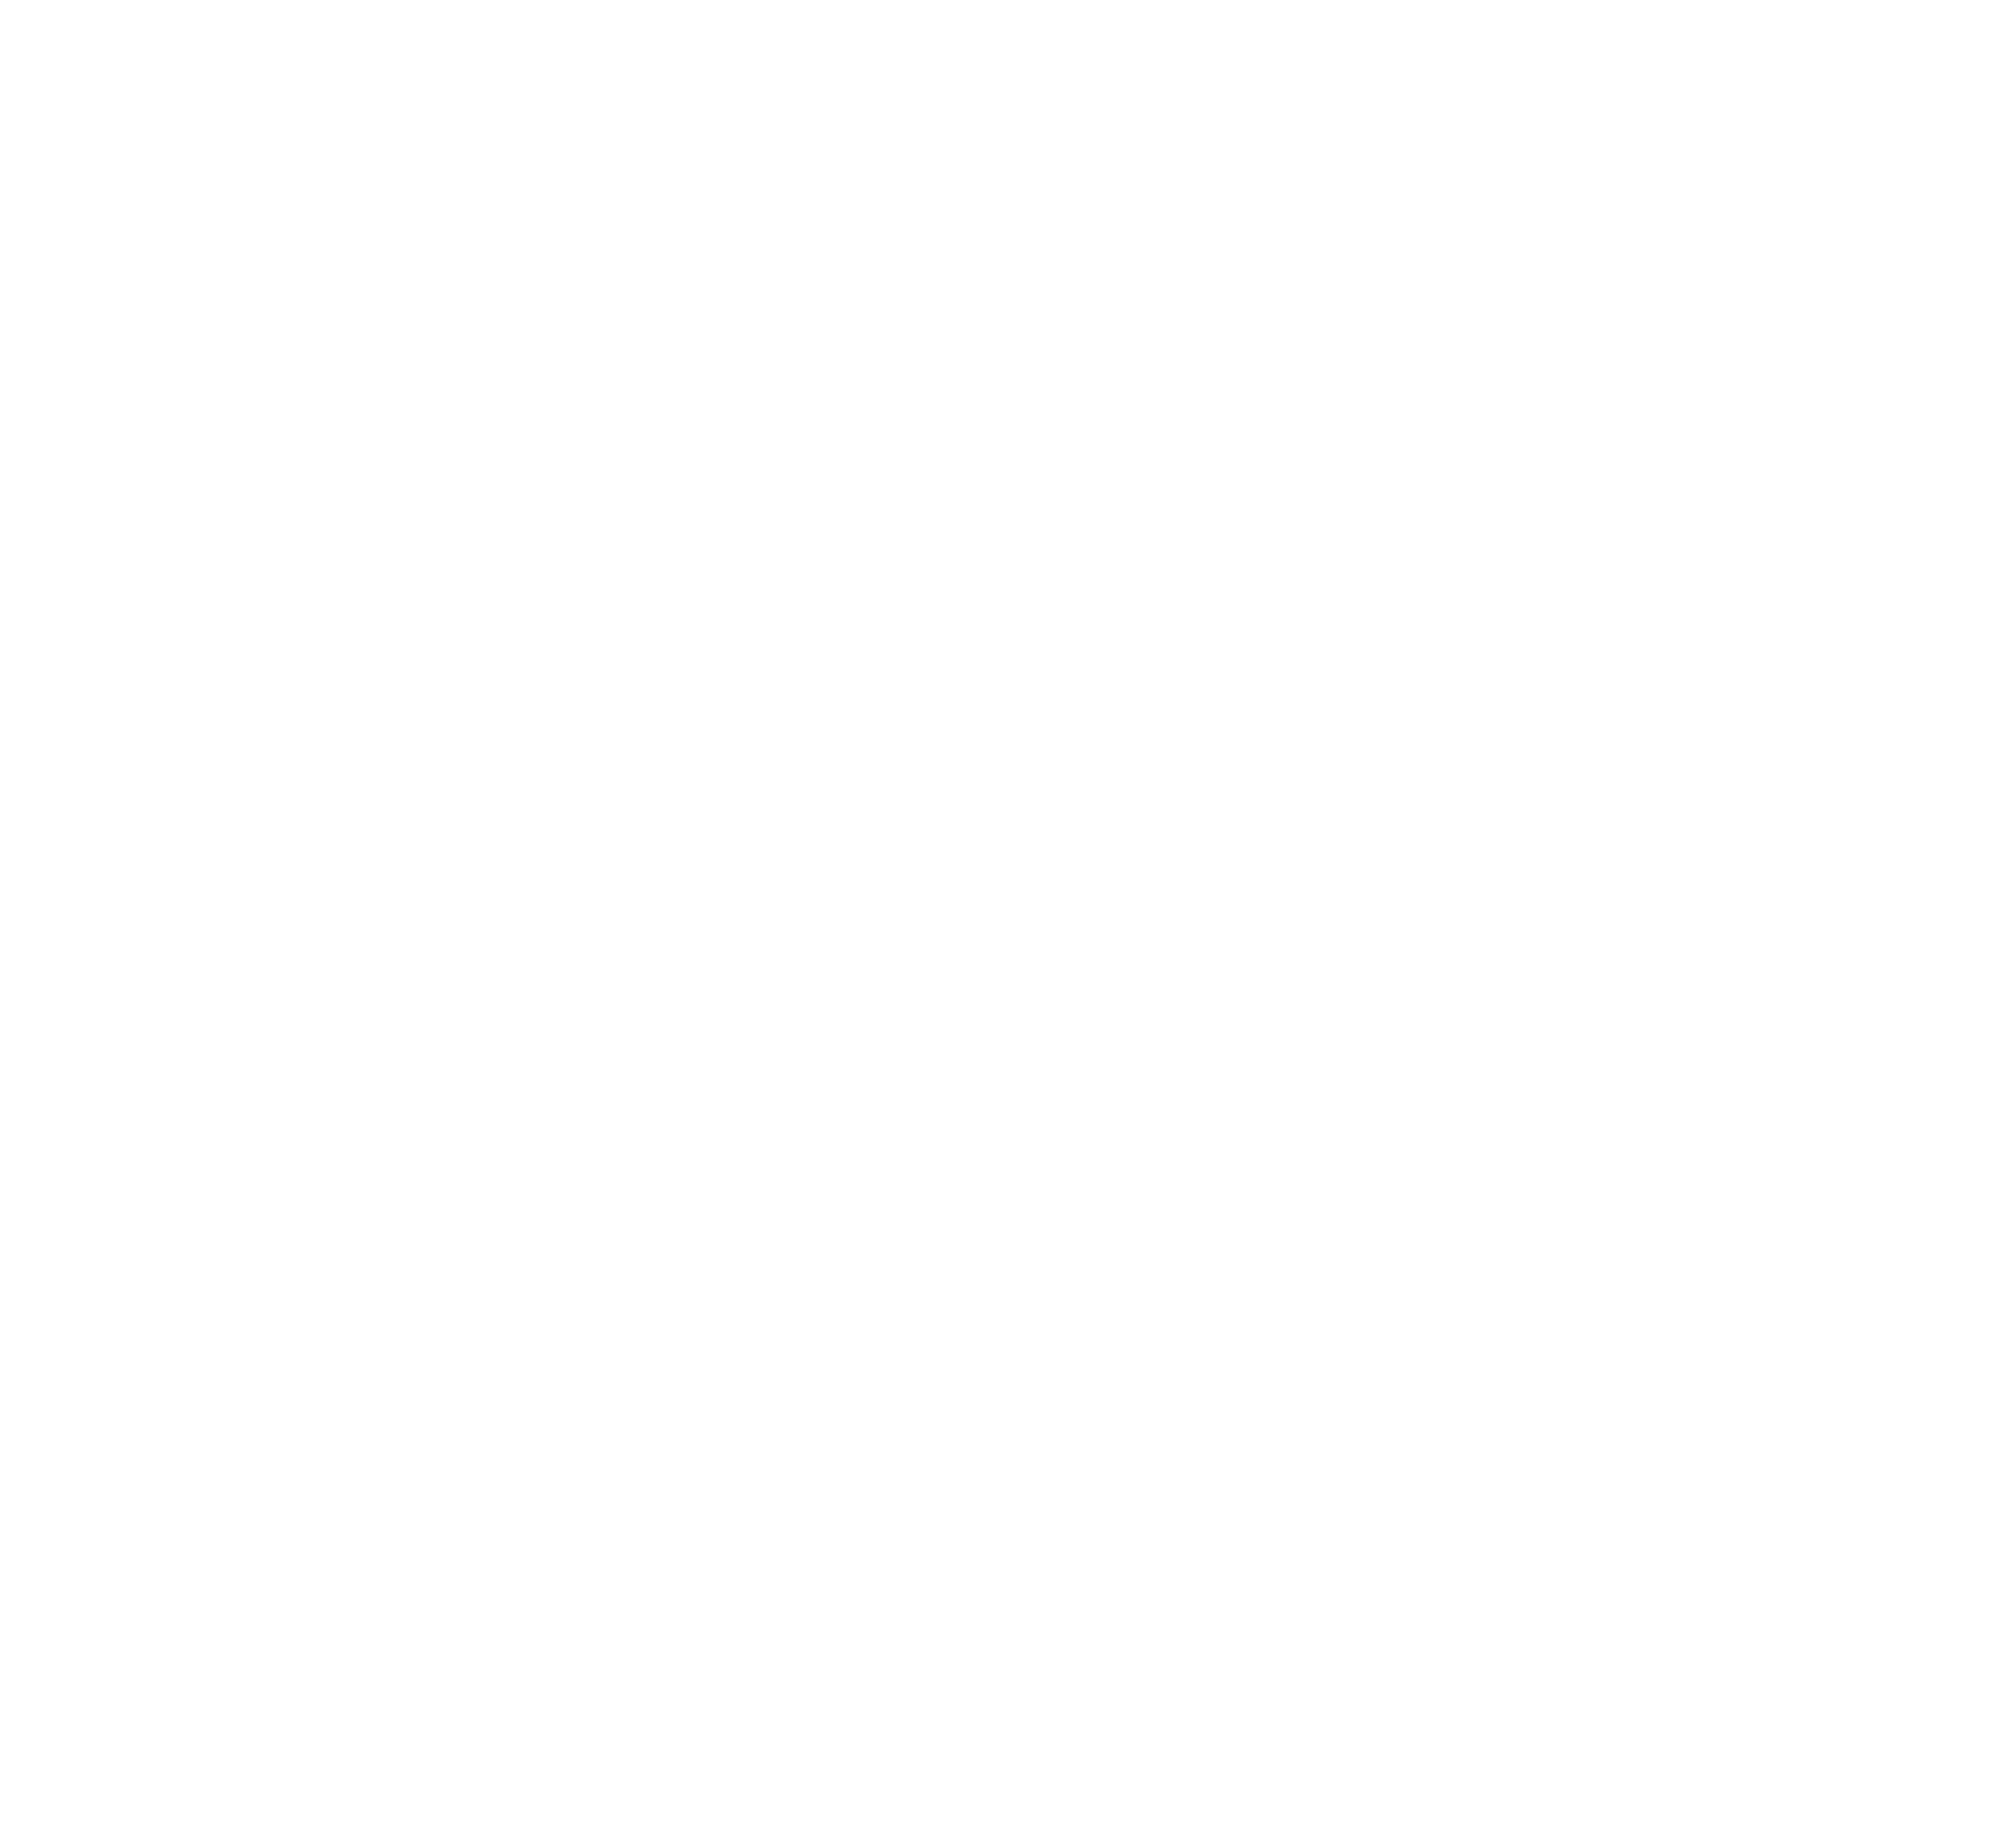 The words Branding Bear appear over a silhouette of a bear making a mark and the words Make Your Mark at the bottom